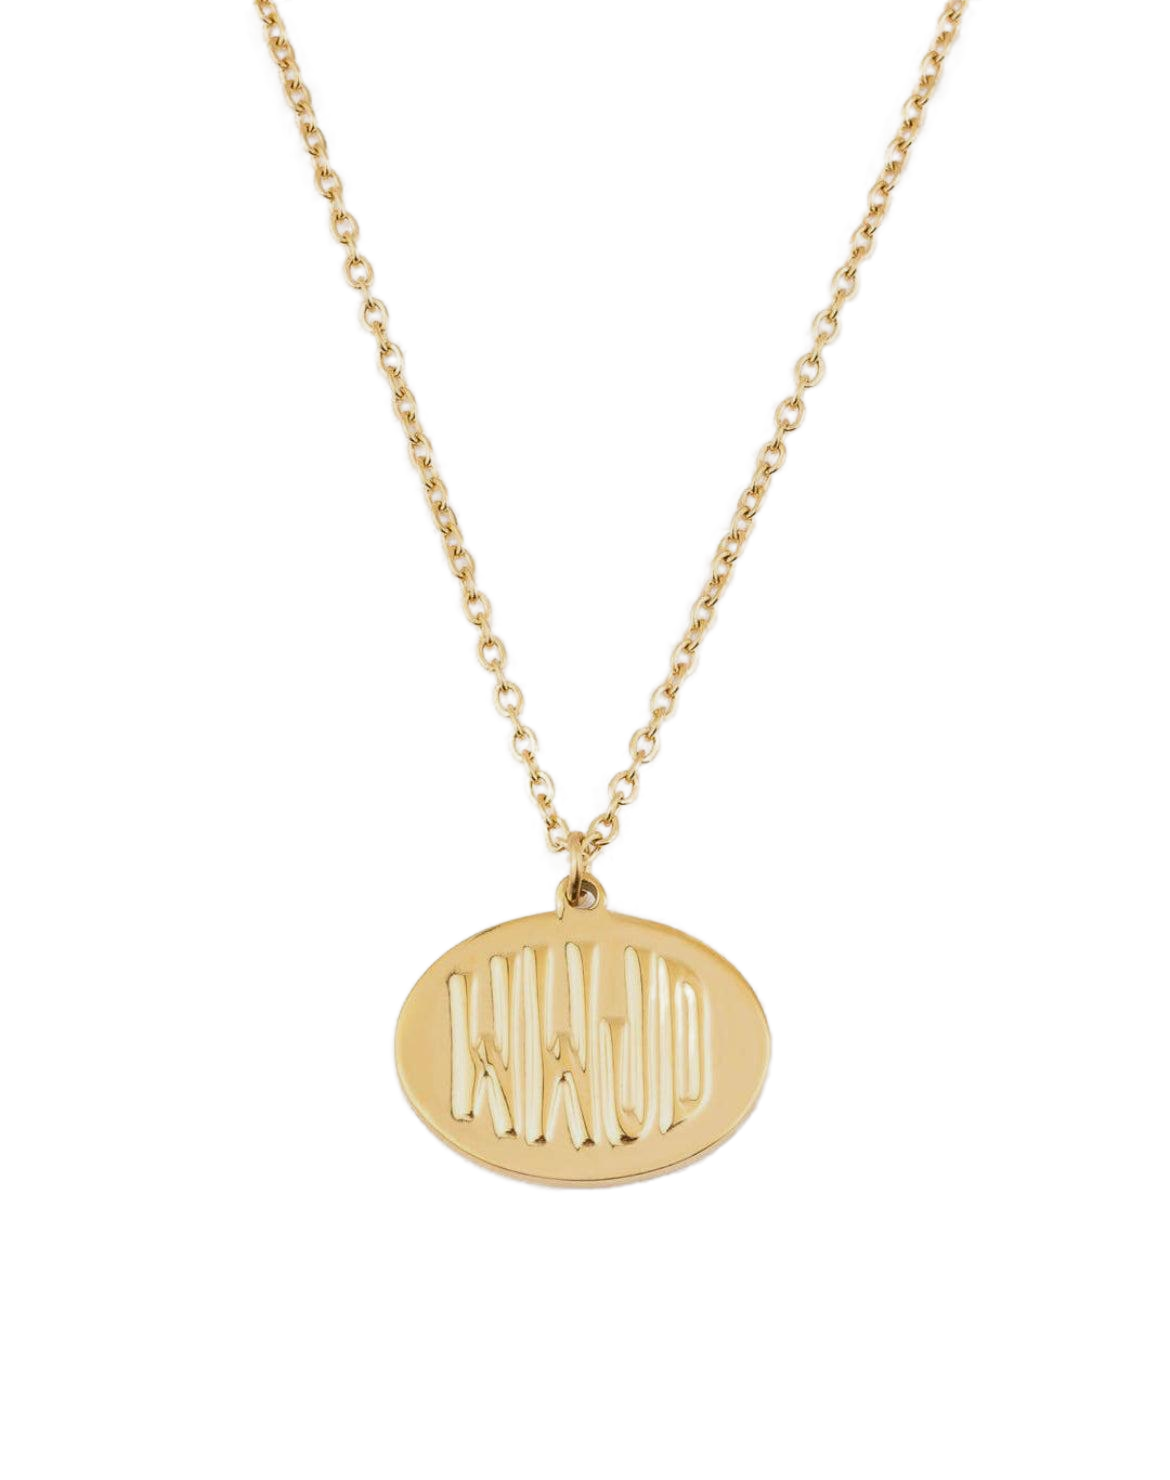 wwjd gold necklace